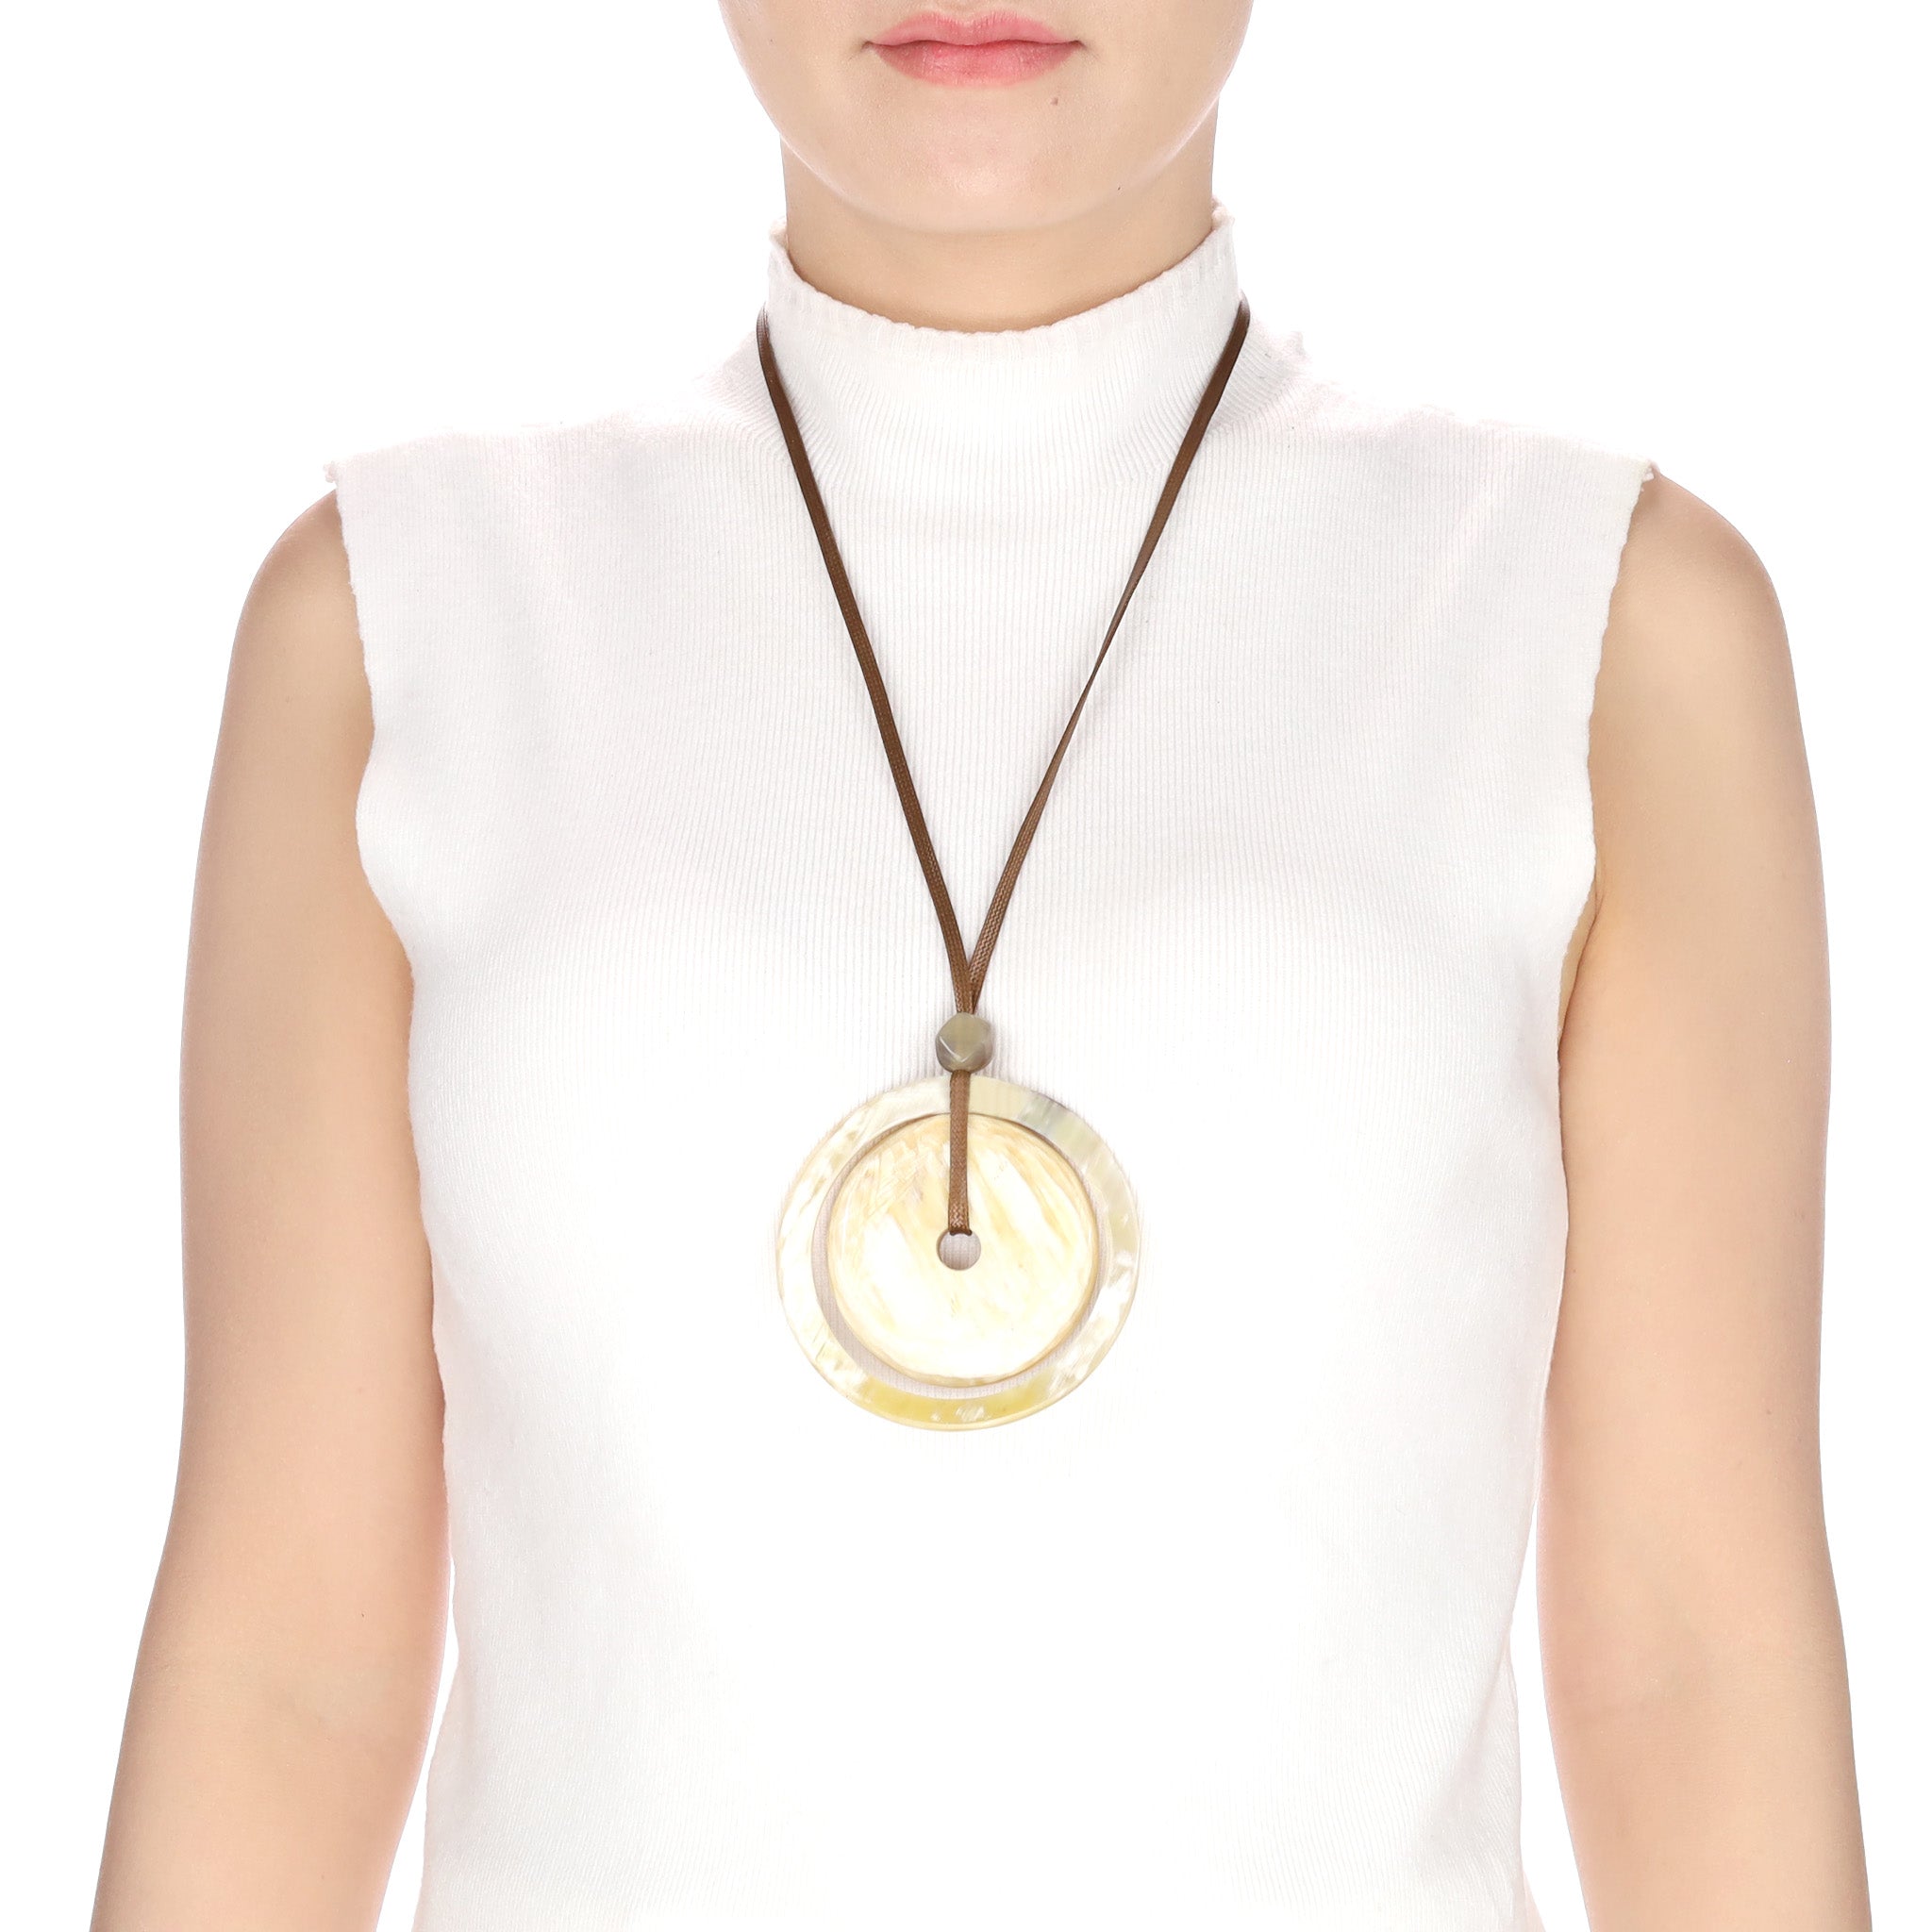 Buffalo Horn Concentric Circle Pendant on Cord On Body View - Vivo Direct 